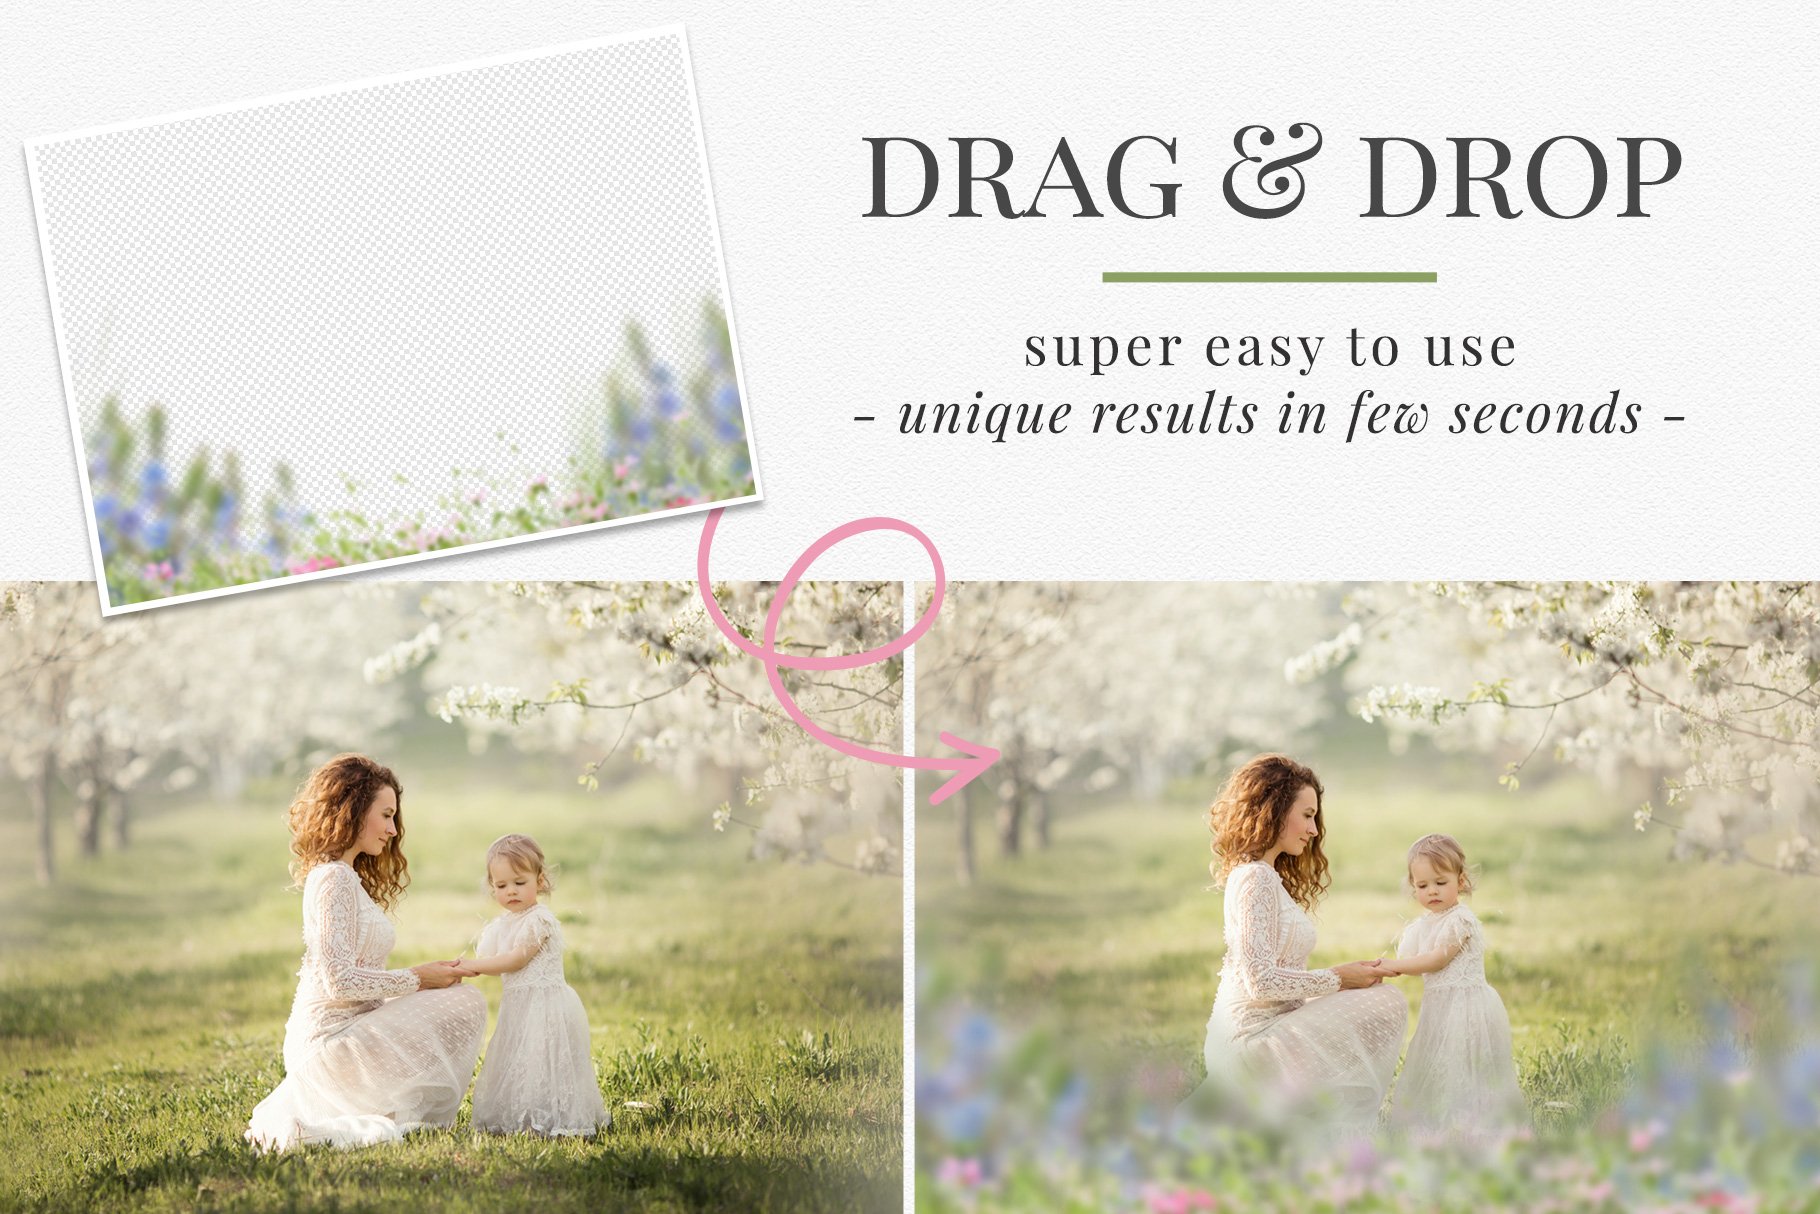 spring meadow photo overlays from brown leopard drag drop 775